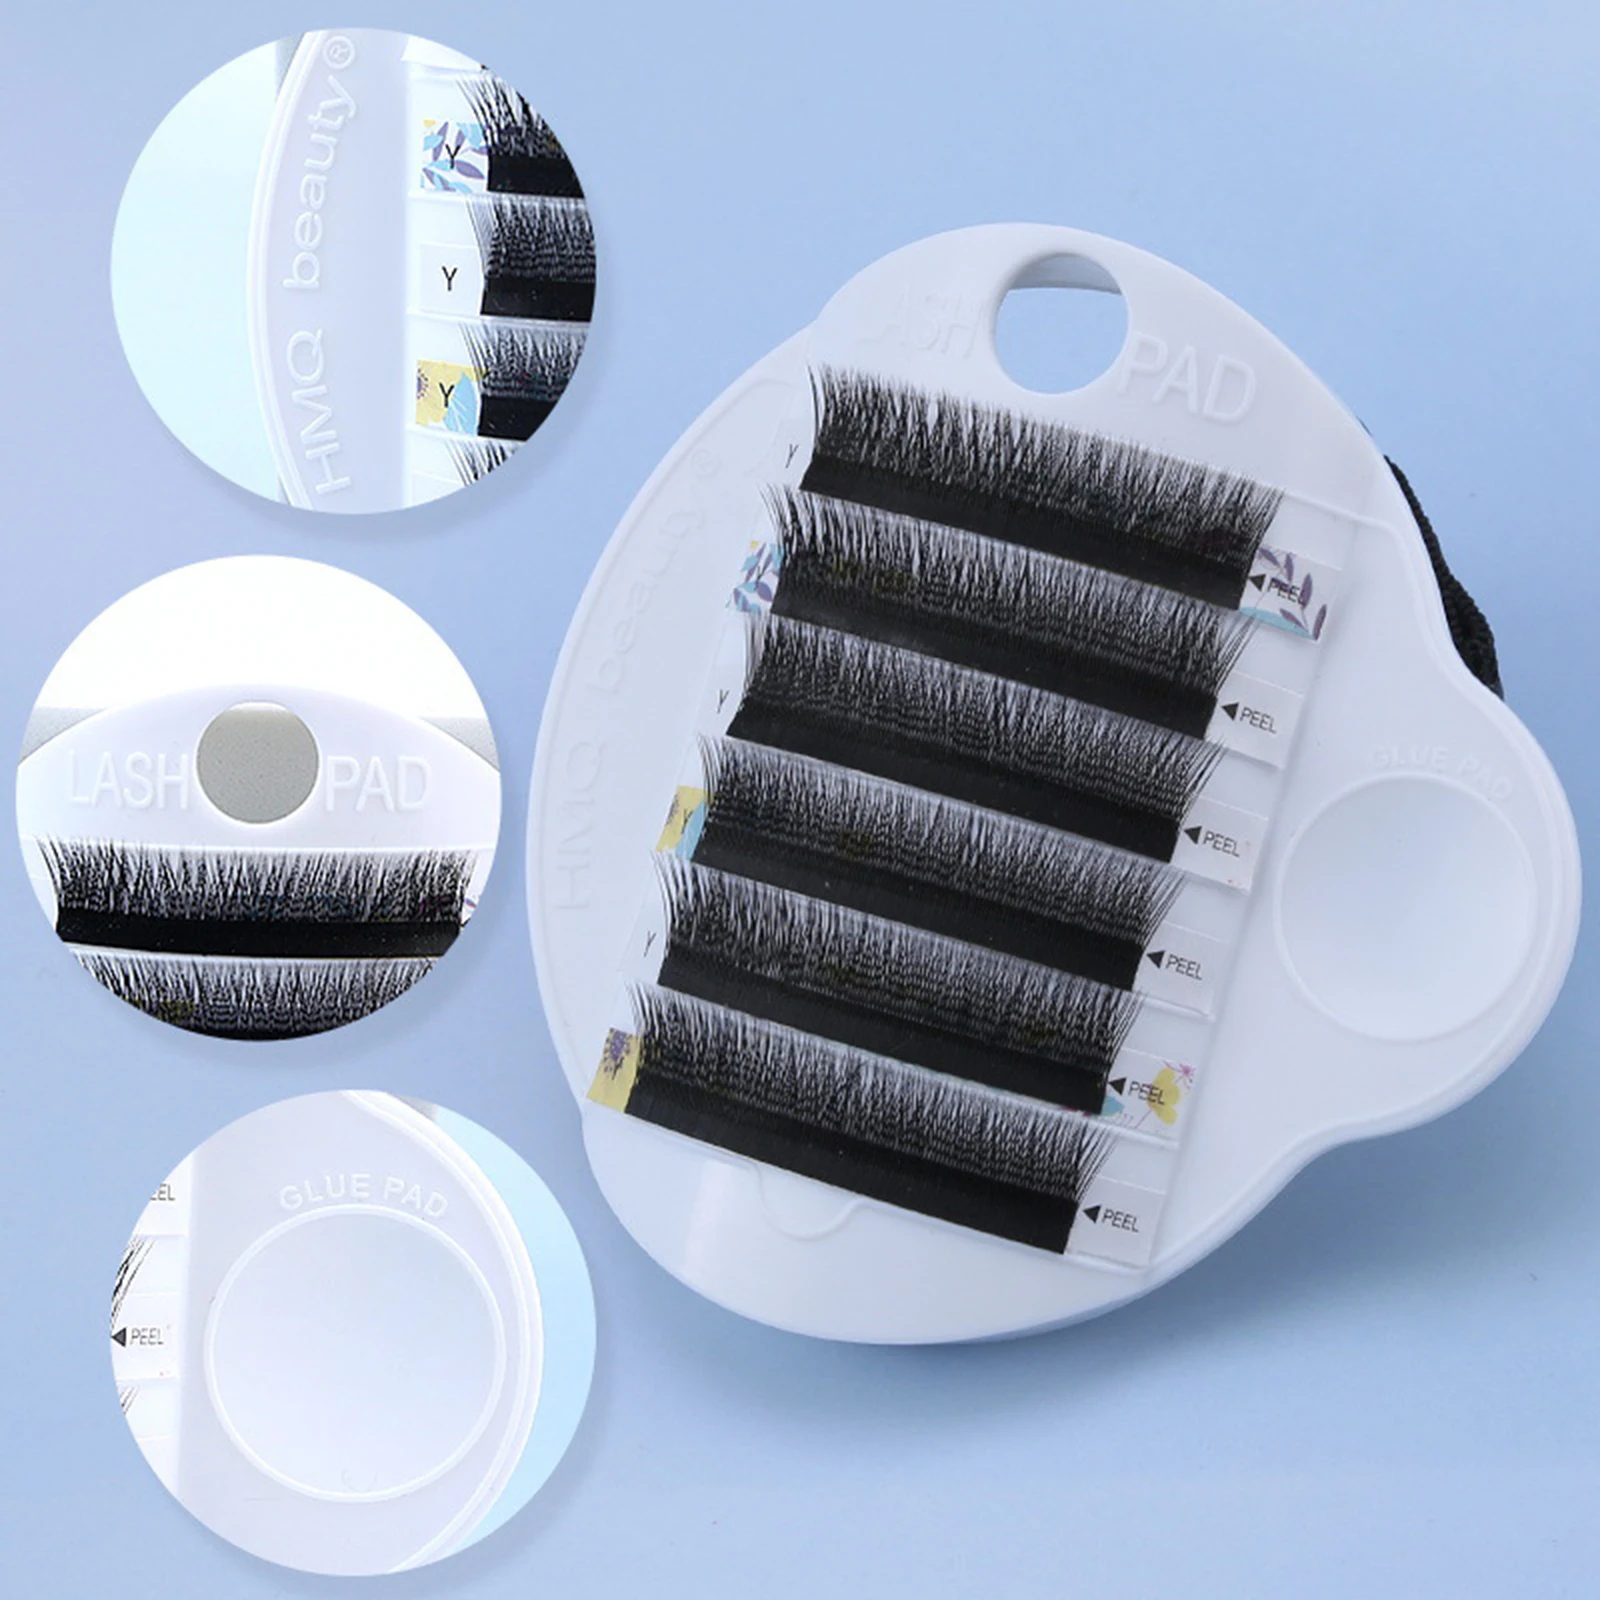 Professional Eyelash Extension Hand Plate Tray with Wrist Strap Plastic Hand Plate Palette Tray Eye Lash Holder